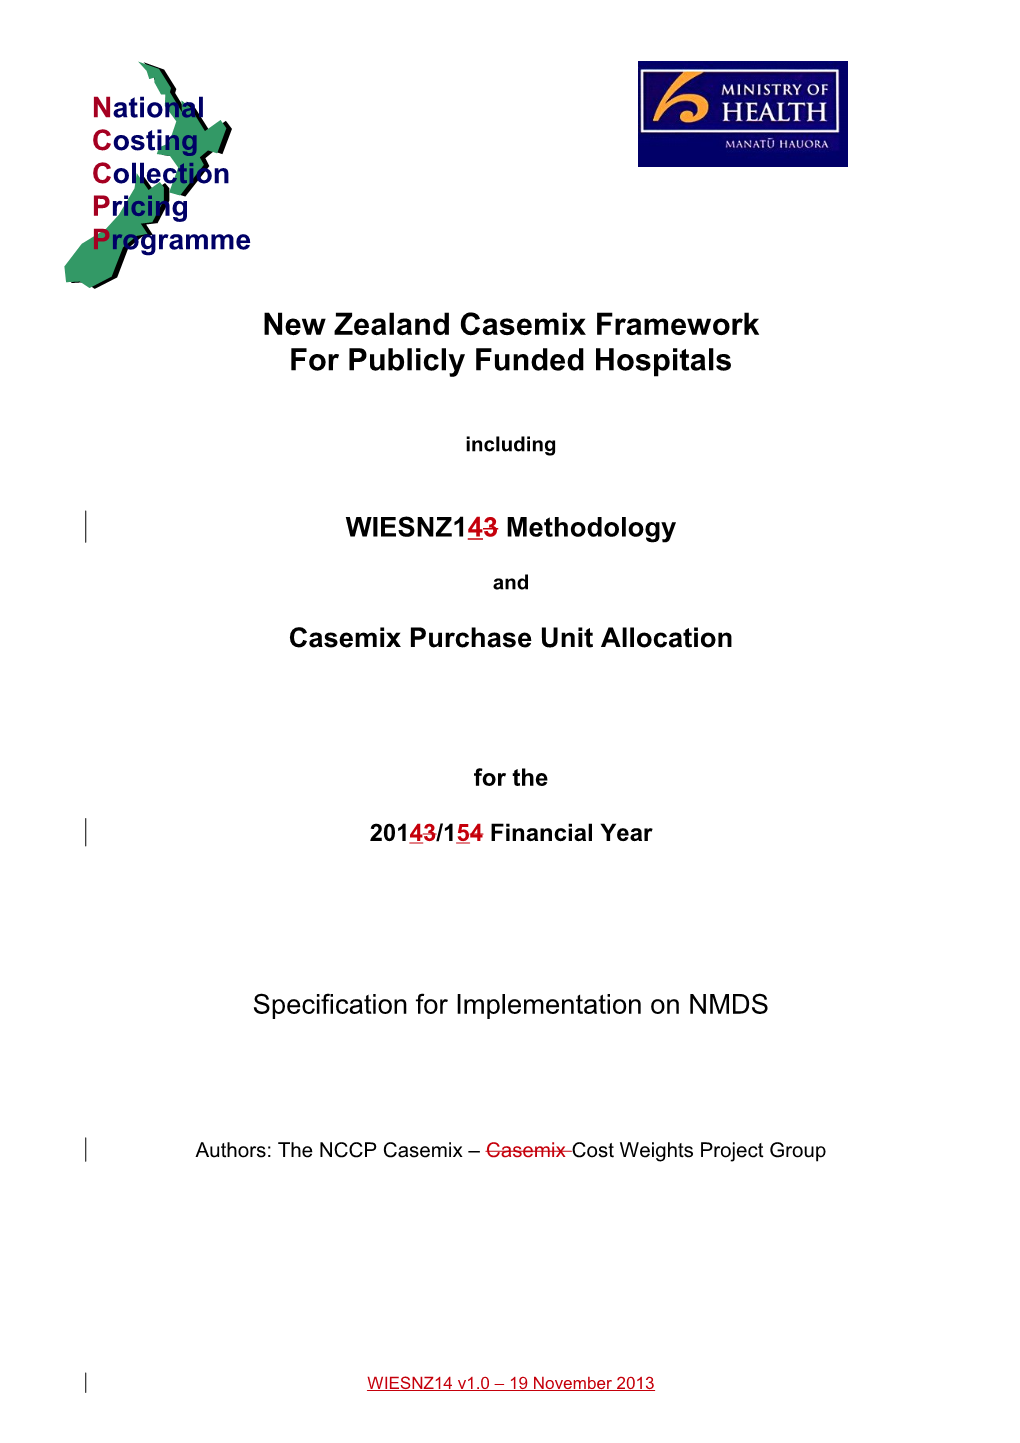 New Zealand Casemix Framework for Publicly Funded Hospitals WIESNZ143 20143/154